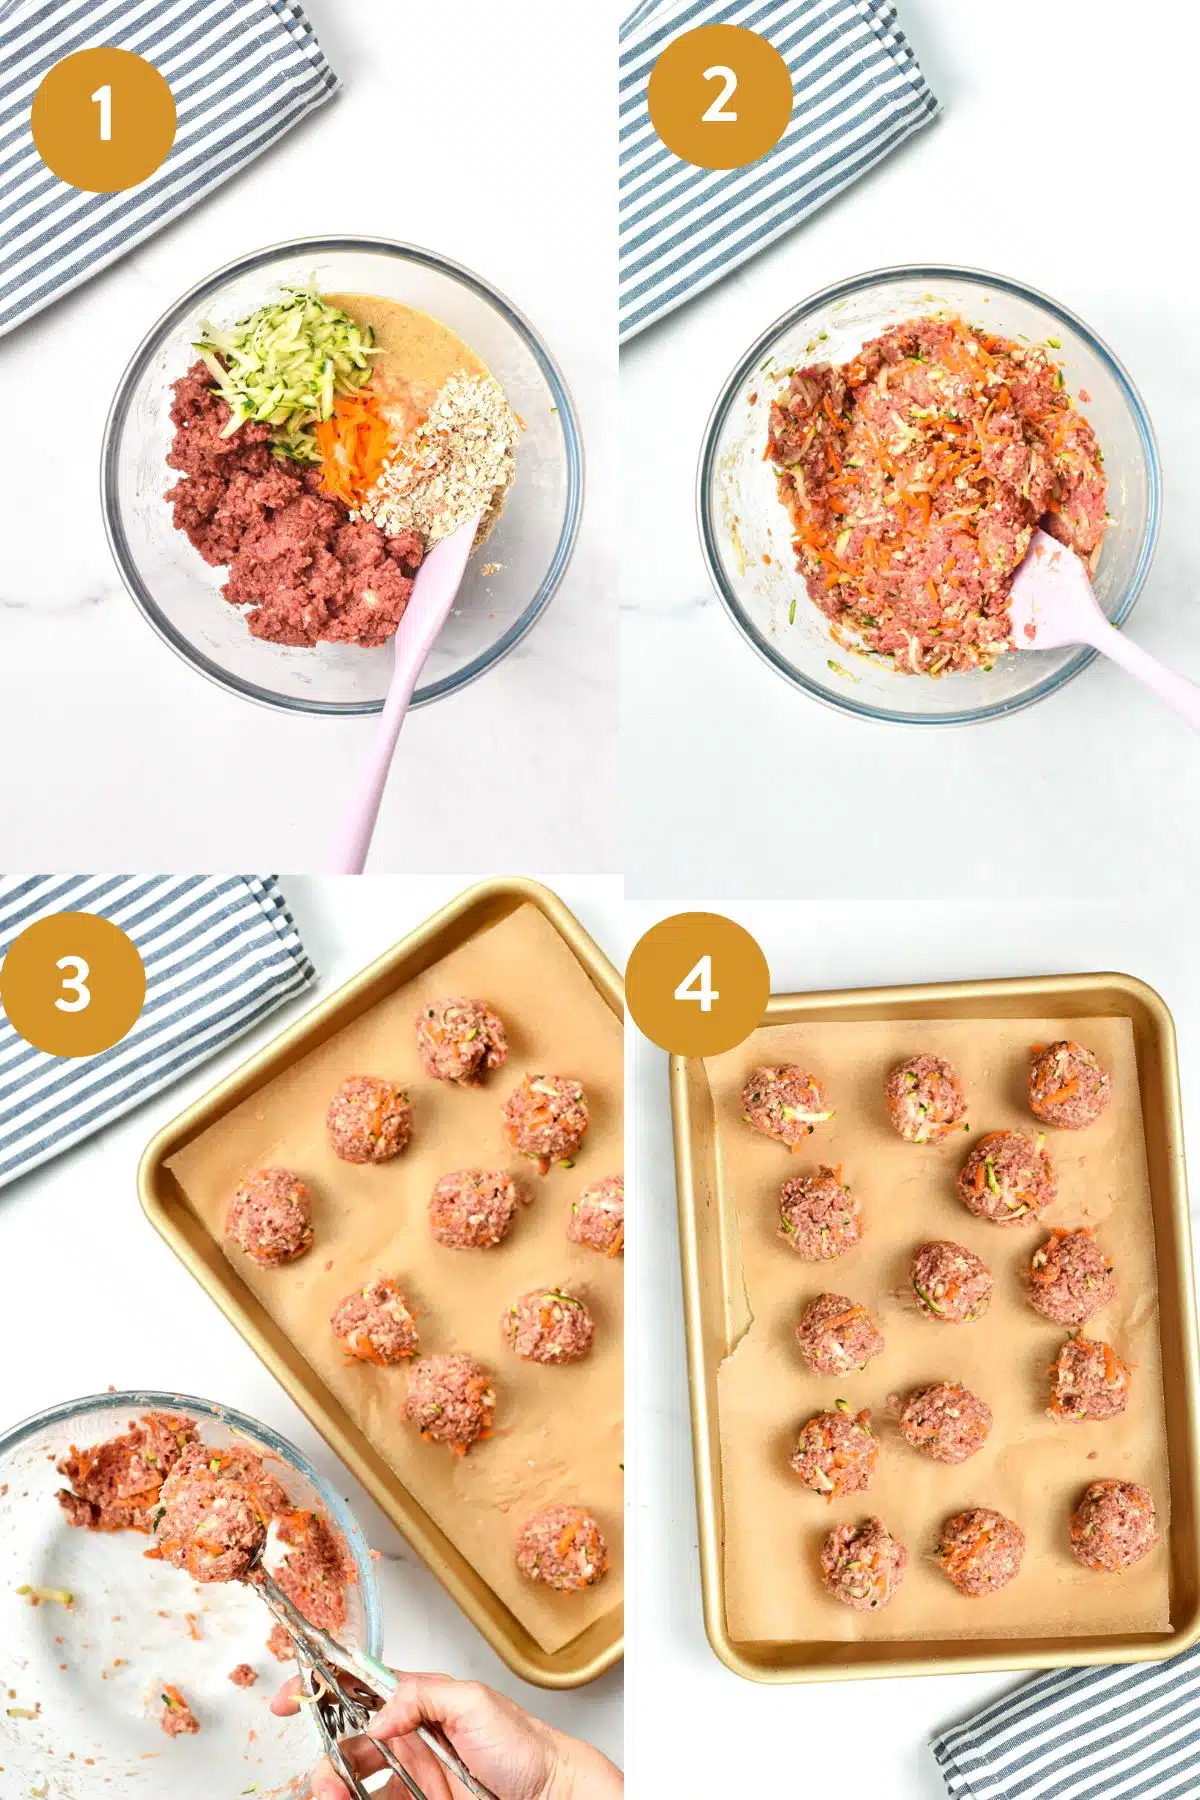 These Meatballs for dogs are easy healthy meatballs for your furry pet. They are packed with vegetables, lean ground meat, and fiber from oats.These Meatballs for dogs are easy healthy meatballs for your furry pet. They are packed with vegetables, lean ground meat, and fiber from oats.